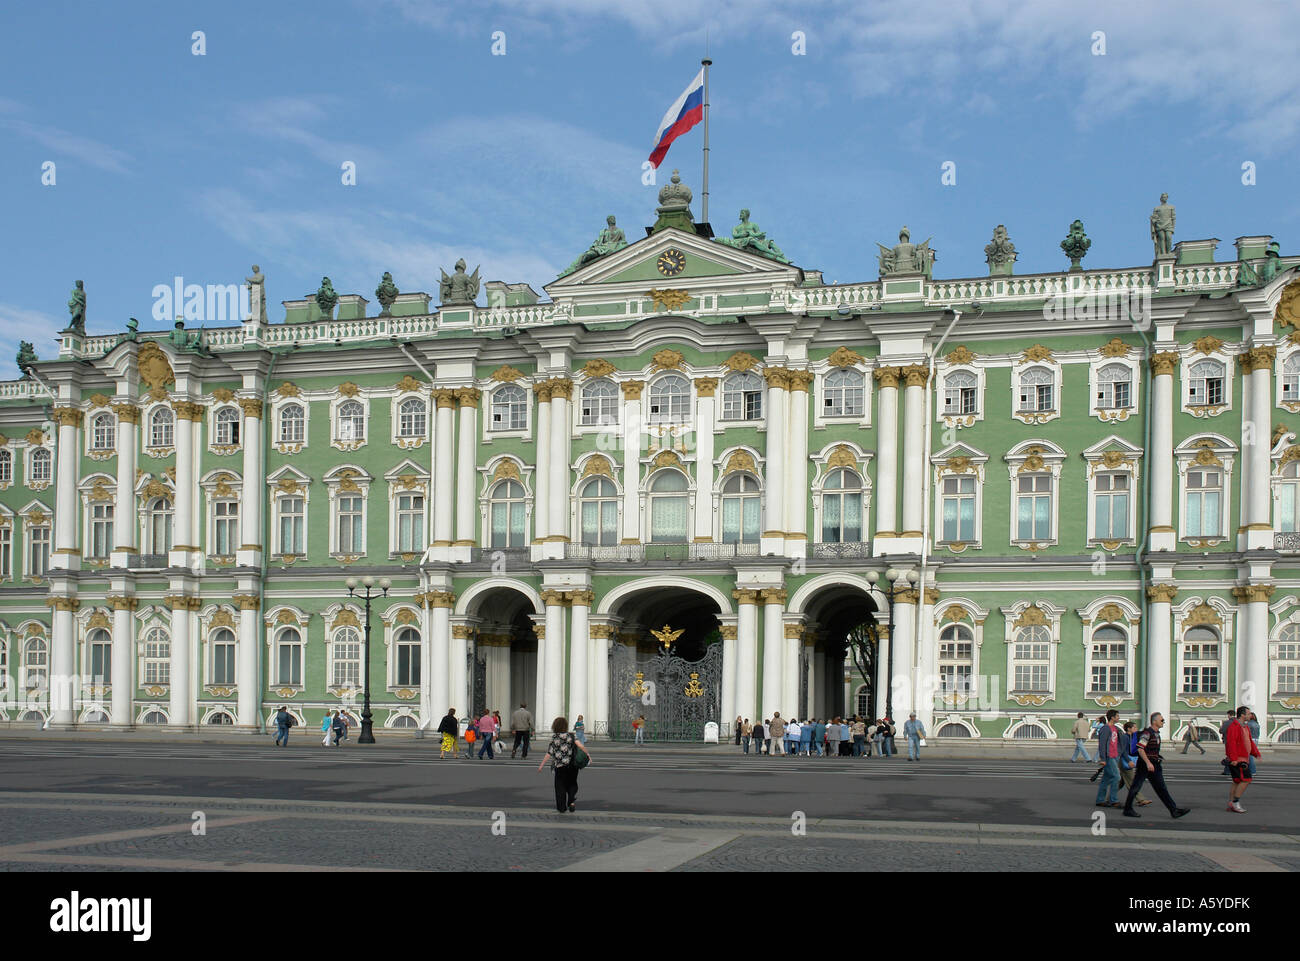 Painet jj2015 russia hermitage art gallery housed winter palace saint st. petersburg 20060801 2 architecture europe eastern Stock Photo